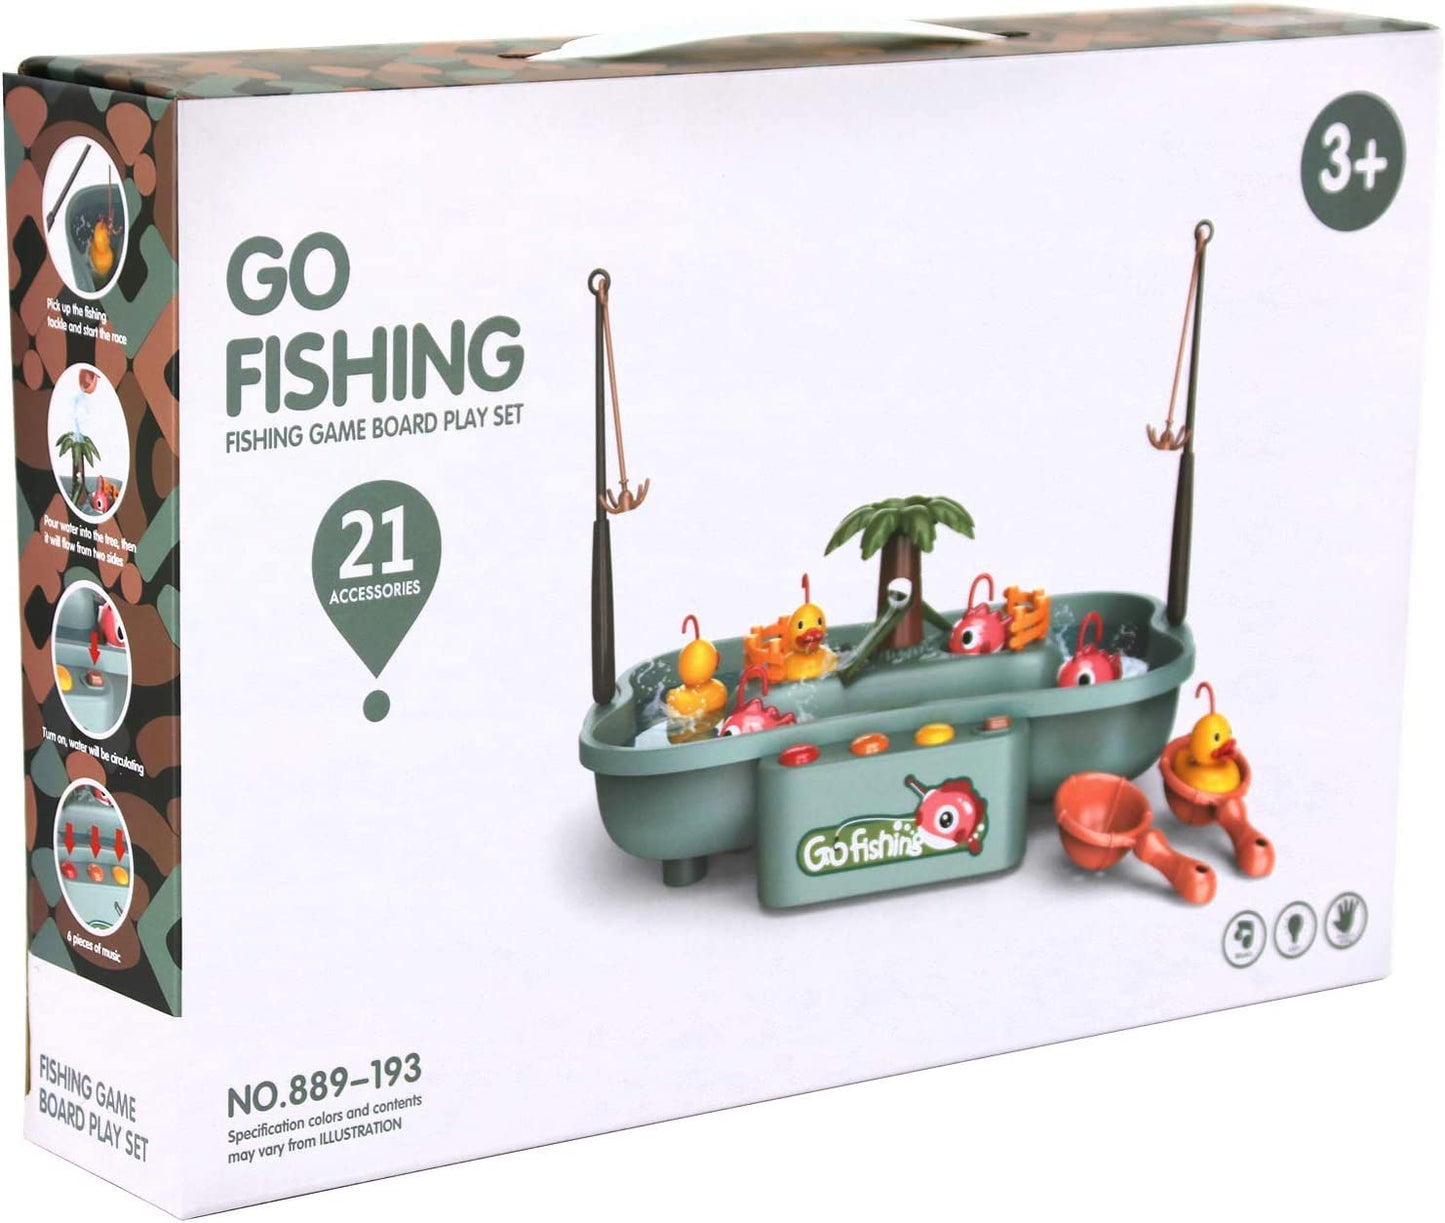 Fish Catcher, Water Circulating Fish Game Board Play Set With 3 Ducks,3 Fish,2 Water Ladles